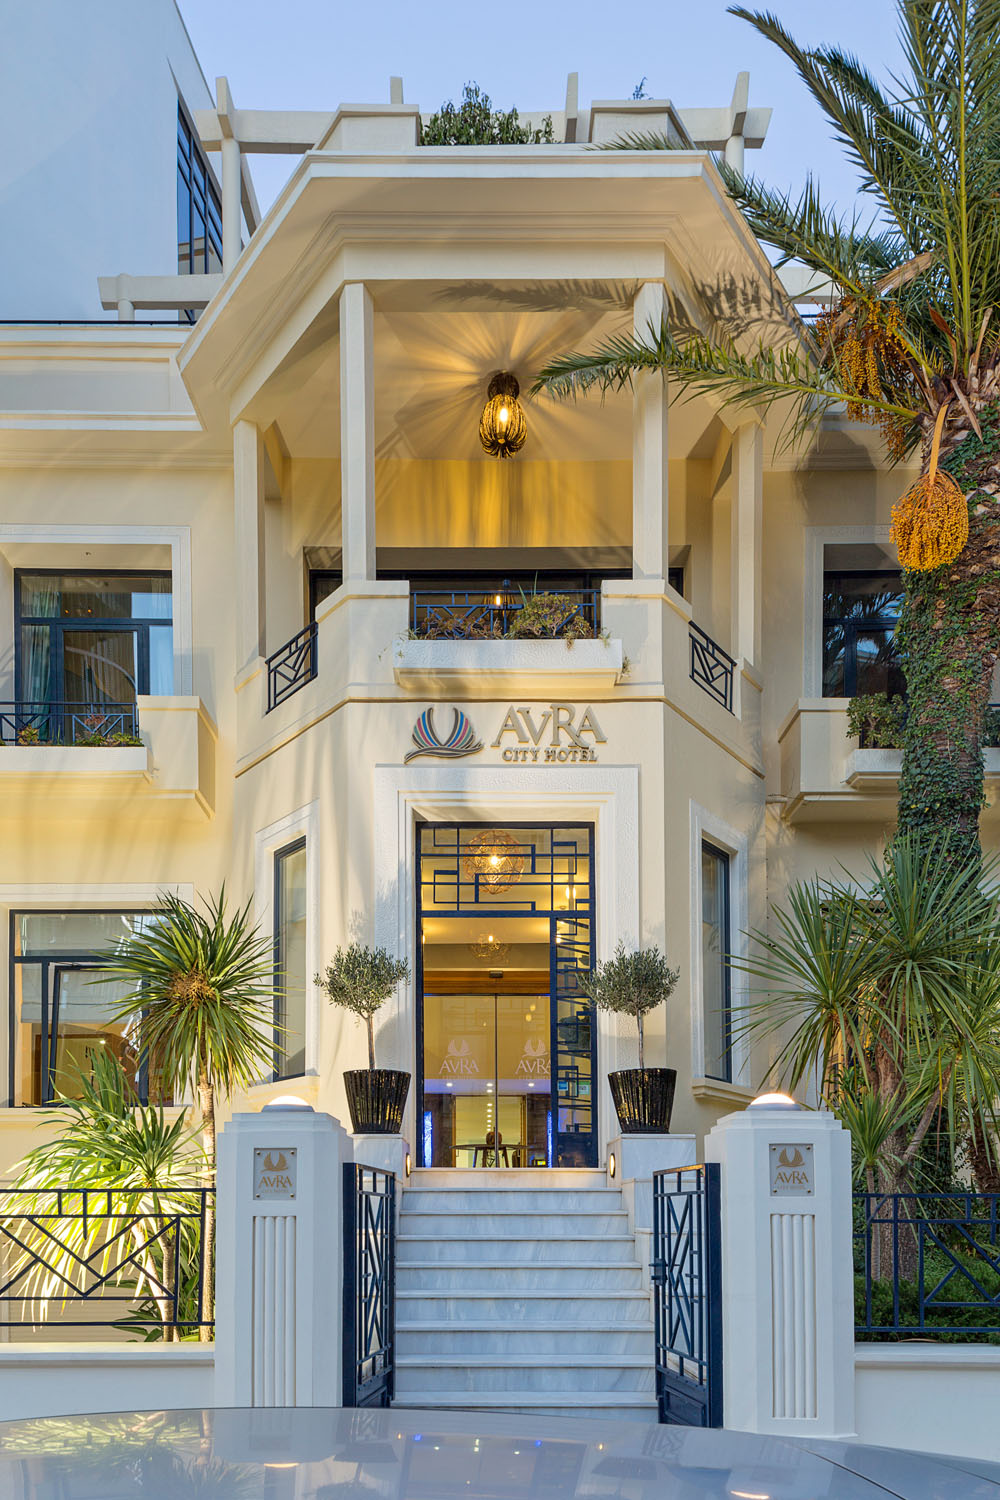 Entrance of the Hotel